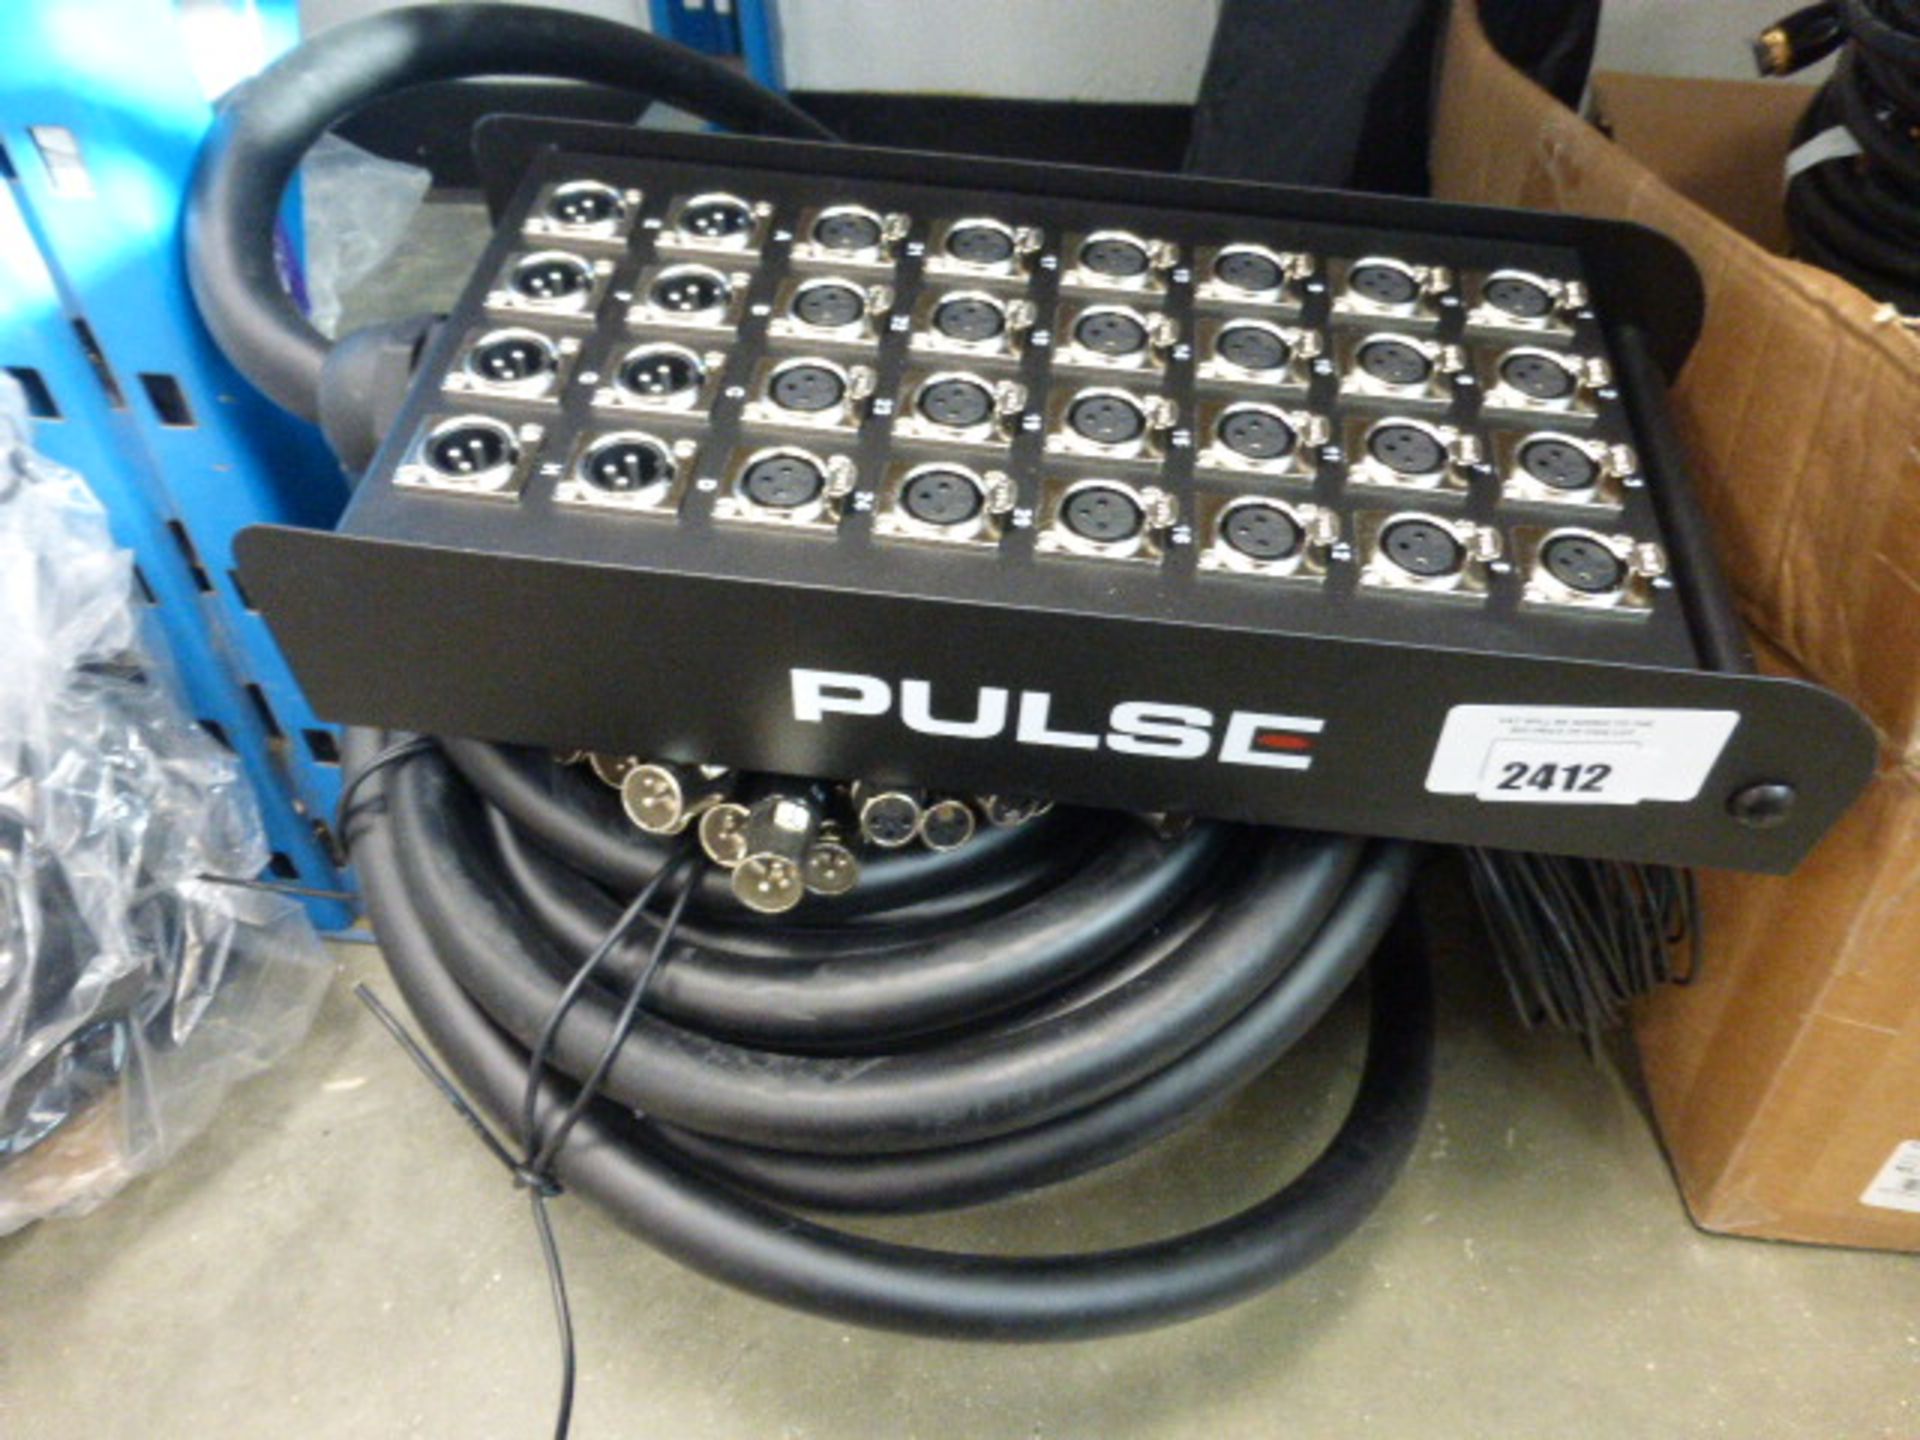 Pulse 24 port line-in adaptor cable set